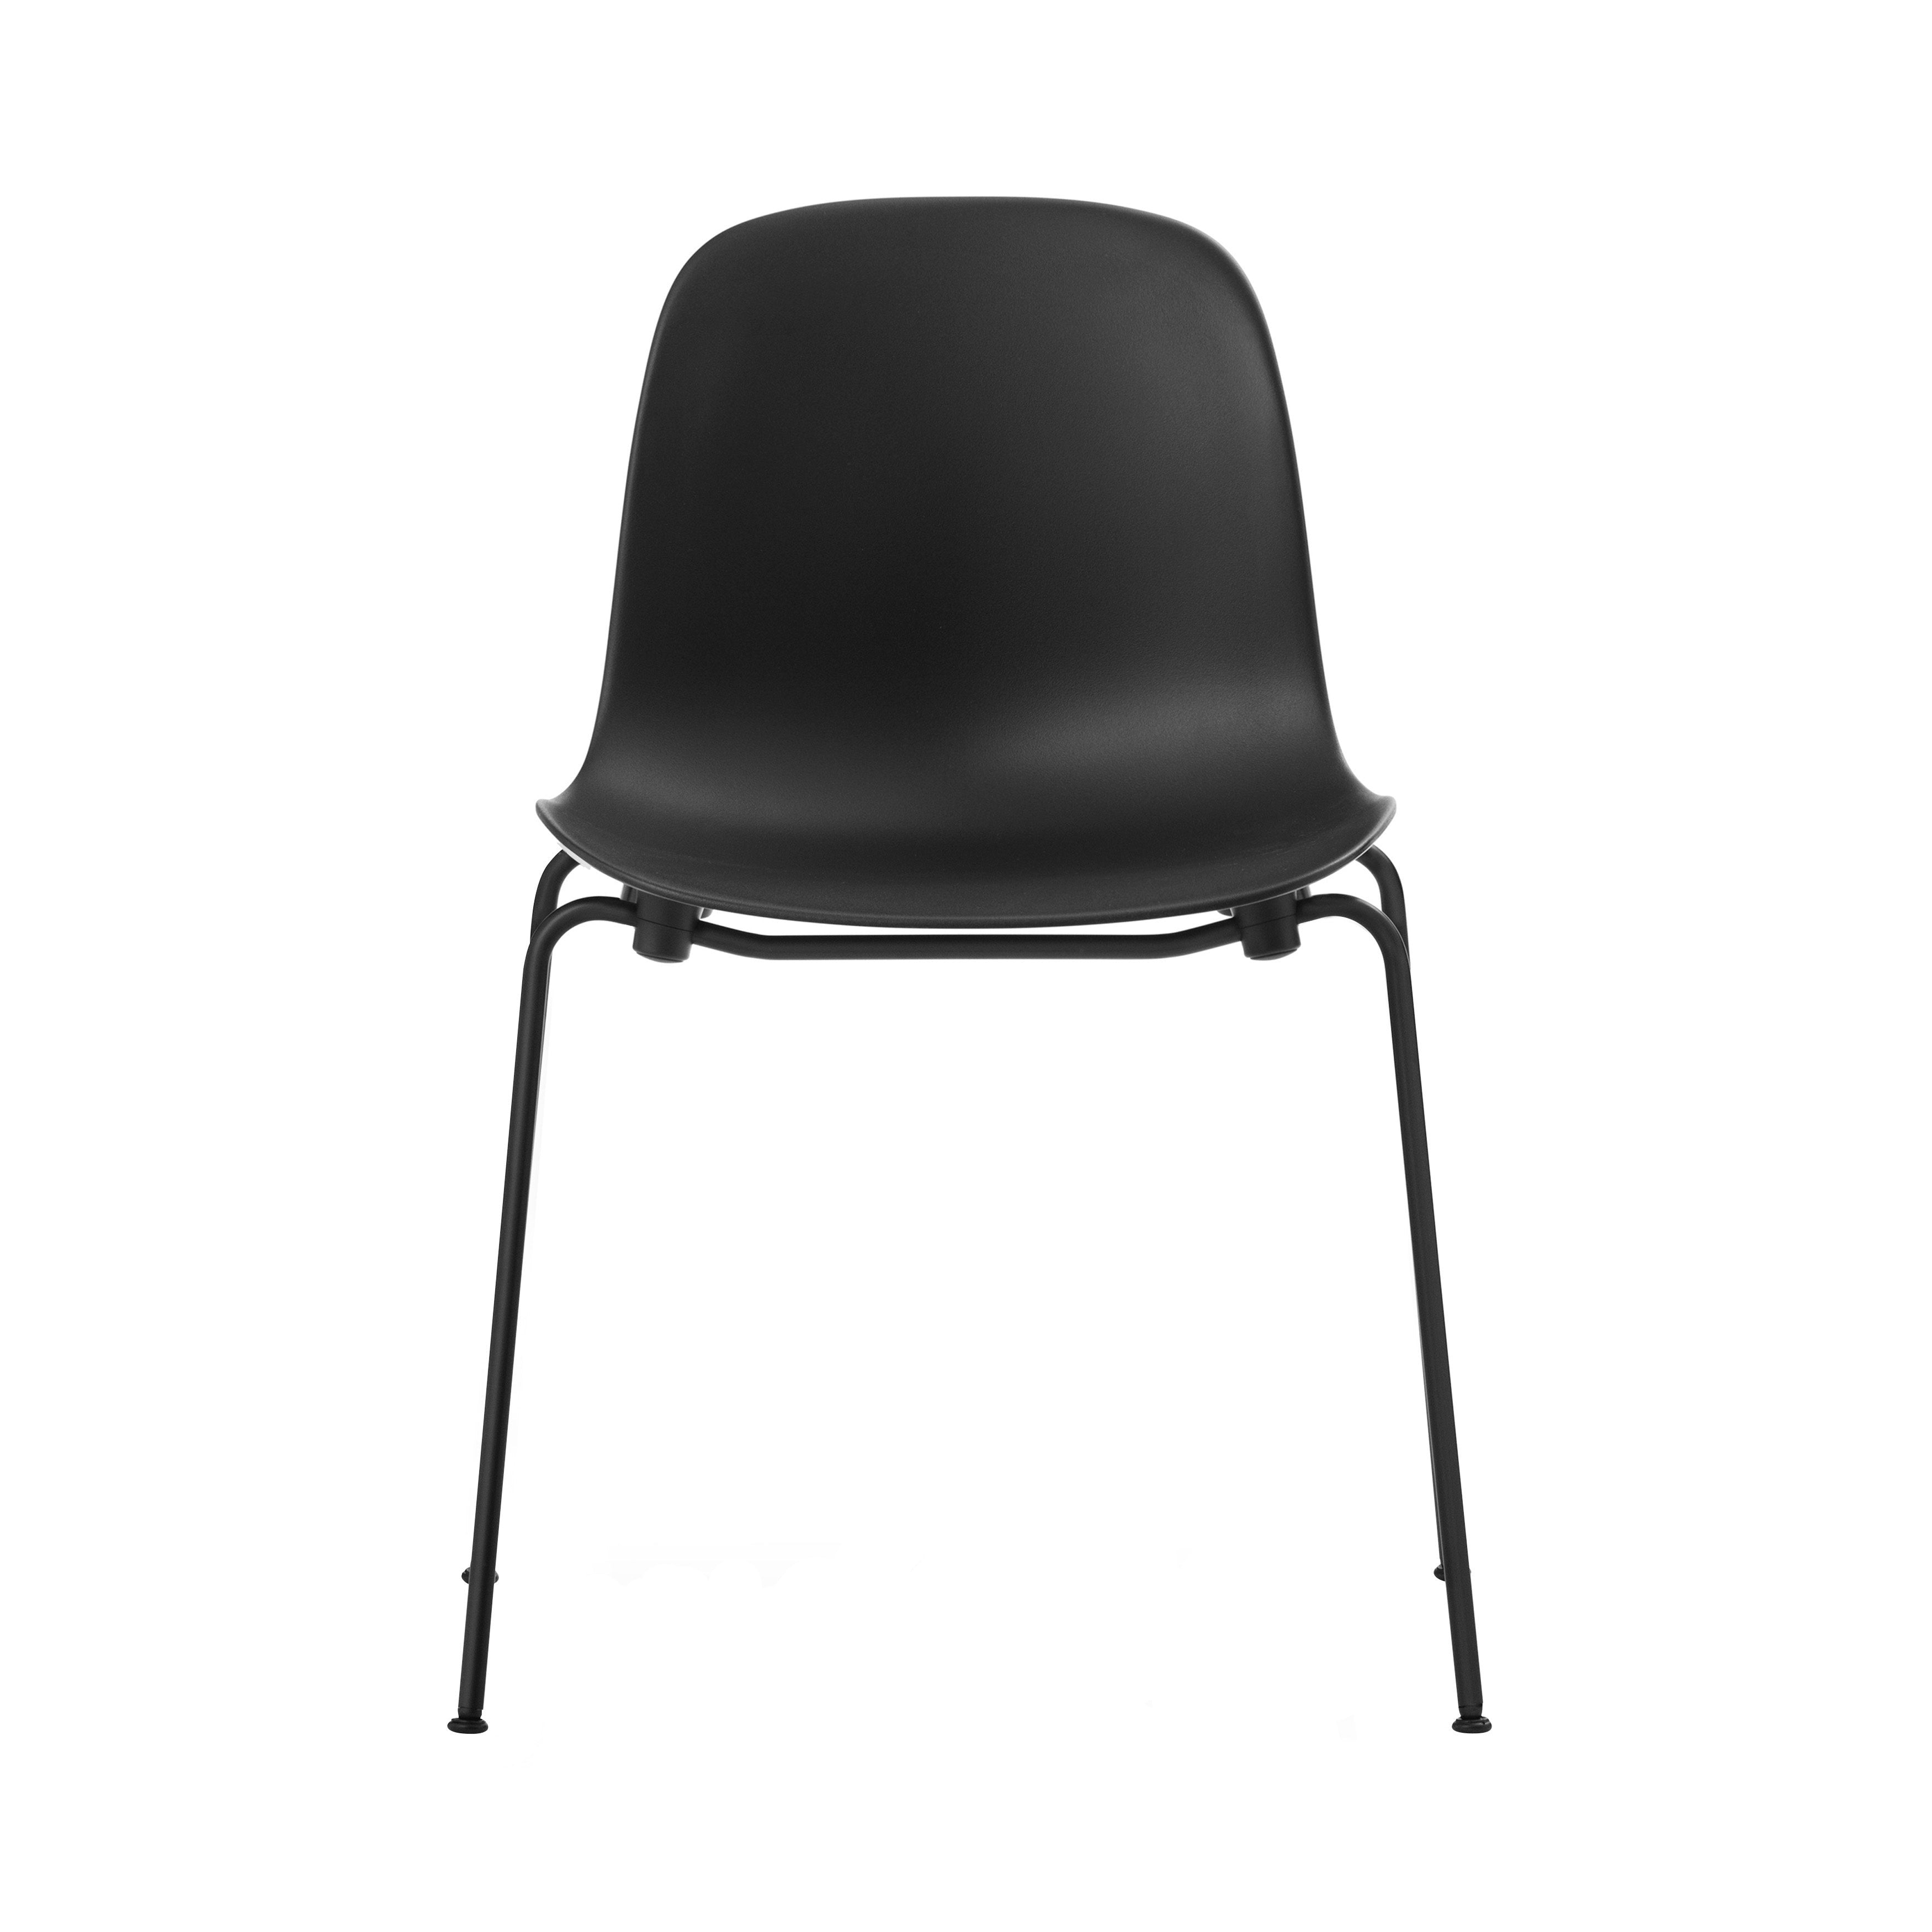 Form Stacking Chair: Steel + Black